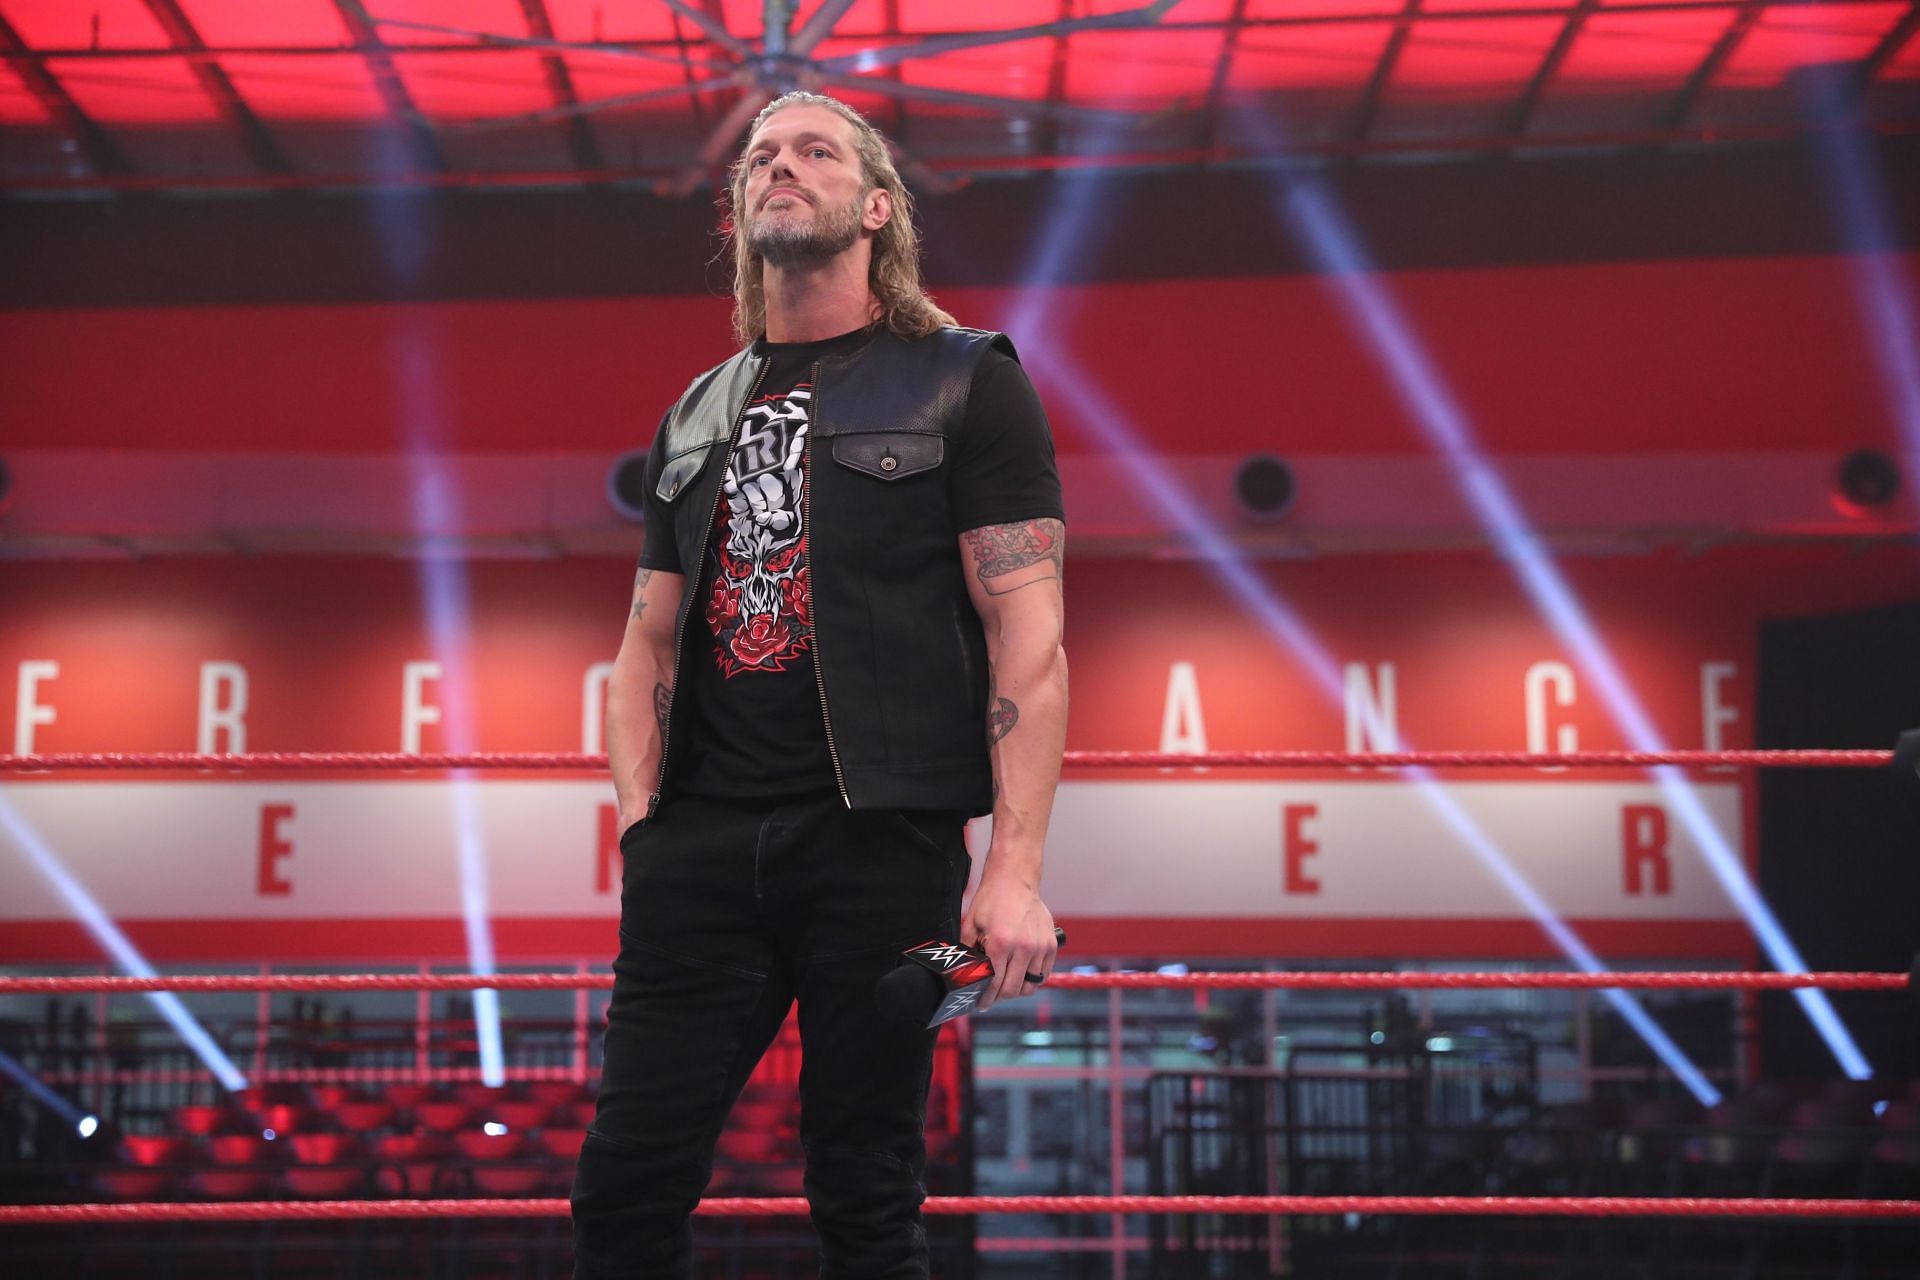 Edge made his shocking return to the WWE at the Royal Rumble nearly two years ago in 2020...